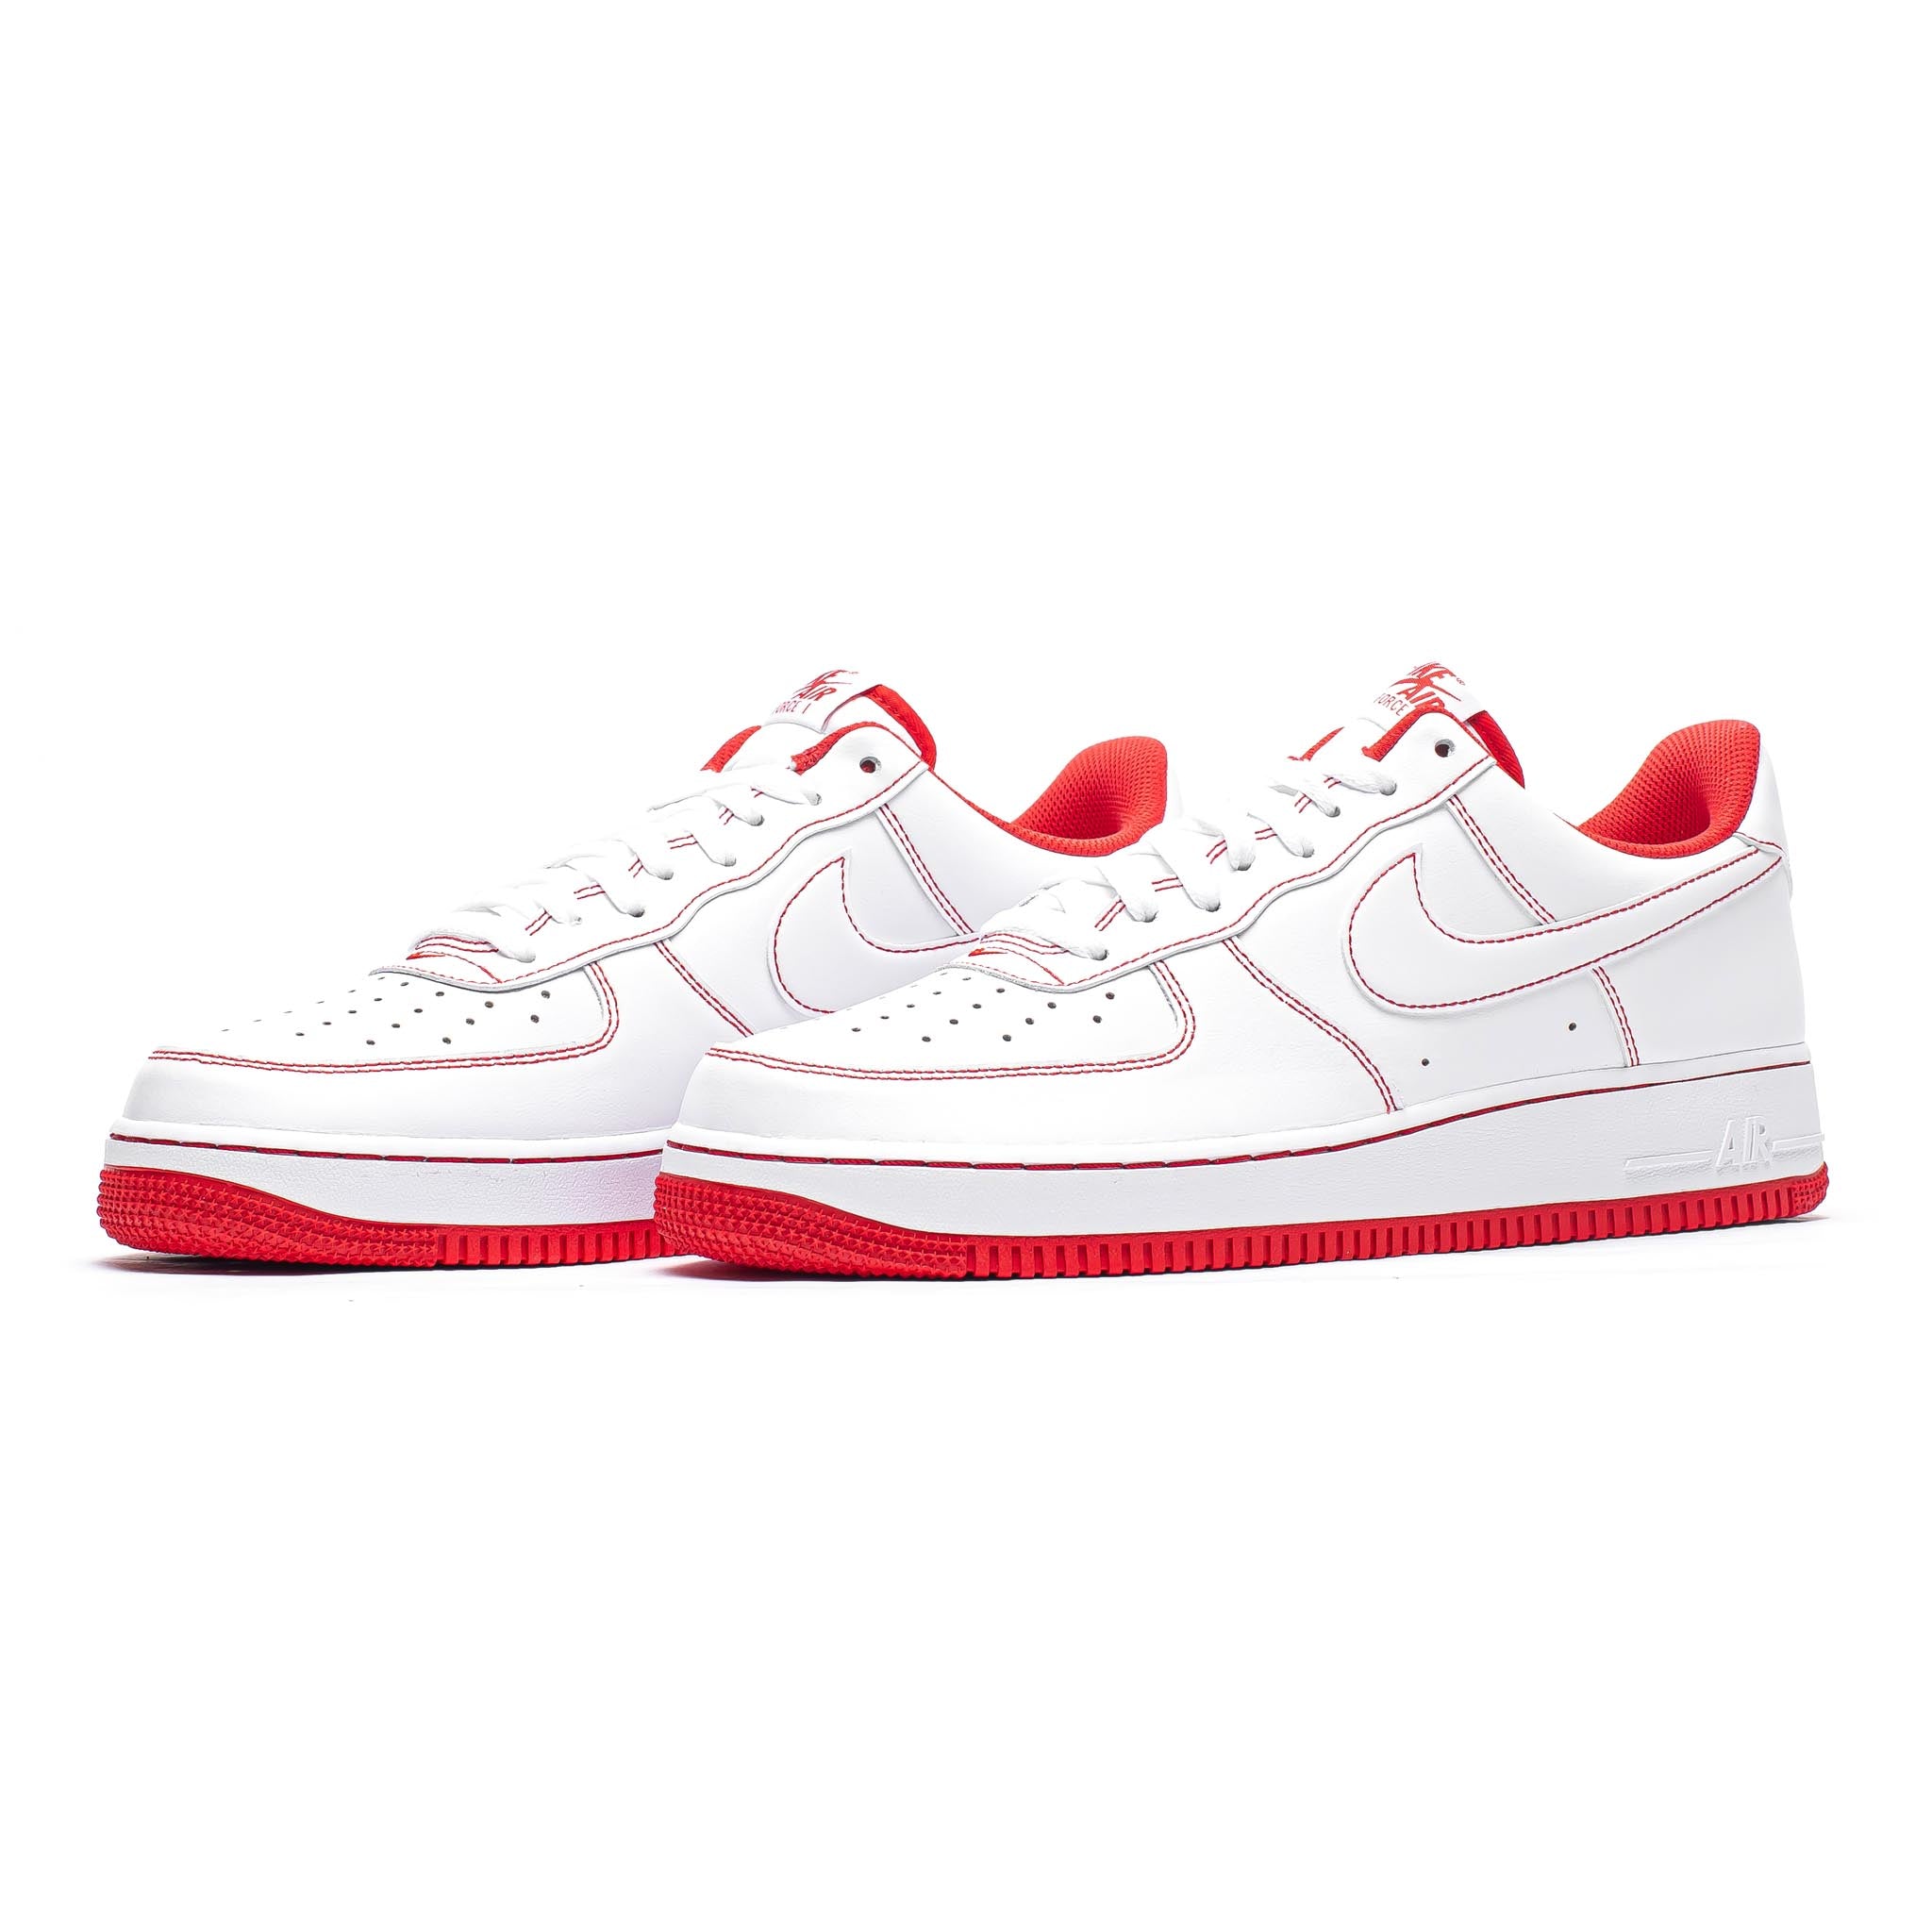 Nike Air Force 1 '07 'Contrast Stitch' White/University Red & SNEAKERBOX